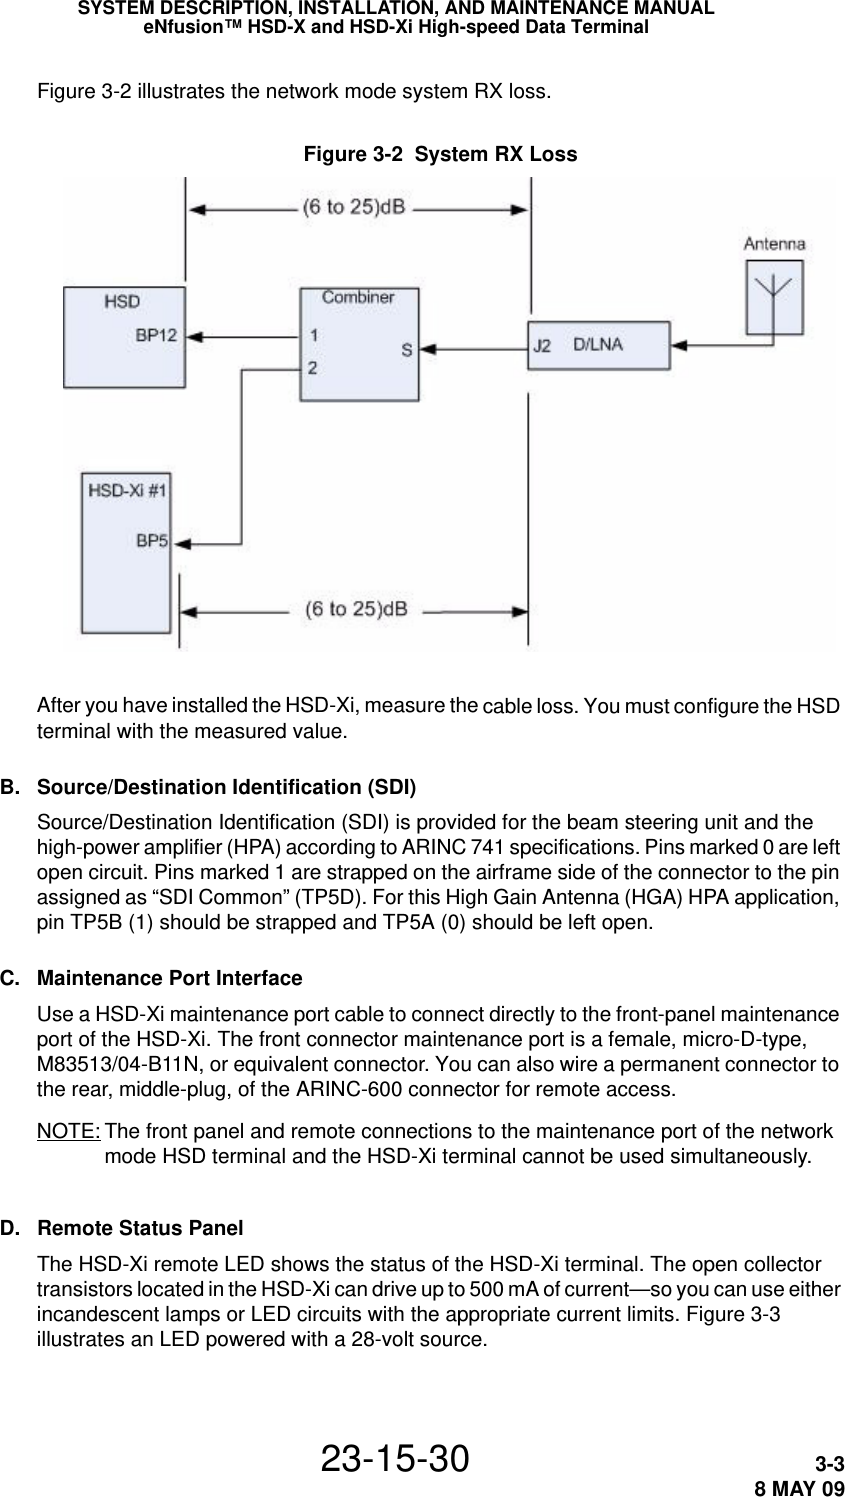 SYSTEM DESCRIPTION, INSTALLATION, AND MAINTENANCE MANUALeNfusion™ HSD-X and HSD-Xi High-speed Data Terminal23-15-30 3-38 MAY 09Figure 3-2 illustrates the network mode system RX loss. Figure 3-2  System RX LossAfter you have installed the HSD-Xi, measure the cable loss. You must configure the HSD terminal with the measured value.B. Source/Destination Identification (SDI)Source/Destination Identification (SDI) is provided for the beam steering unit and the high-power amplifier (HPA) according to ARINC 741 specifications. Pins marked 0 are left open circuit. Pins marked 1 are strapped on the airframe side of the connector to the pin assigned as “SDI Common” (TP5D). For this High Gain Antenna (HGA) HPA application, pin TP5B (1) should be strapped and TP5A (0) should be left open.C. Maintenance Port InterfaceUse a HSD-Xi maintenance port cable to connect directly to the front-panel maintenance port of the HSD-Xi. The front connector maintenance port is a female, micro-D-type, M83513/04-B11N, or equivalent connector. You can also wire a permanent connector to the rear, middle-plug, of the ARINC-600 connector for remote access.NOTE: The front panel and remote connections to the maintenance port of the network mode HSD terminal and the HSD-Xi terminal cannot be used simultaneously.D. Remote Status PanelThe HSD-Xi remote LED shows the status of the HSD-Xi terminal. The open collector transistors located in the HSD-Xi can drive up to 500 mA of current—so you can use either incandescent lamps or LED circuits with the appropriate current limits. Figure 3-3 illustrates an LED powered with a 28-volt source.